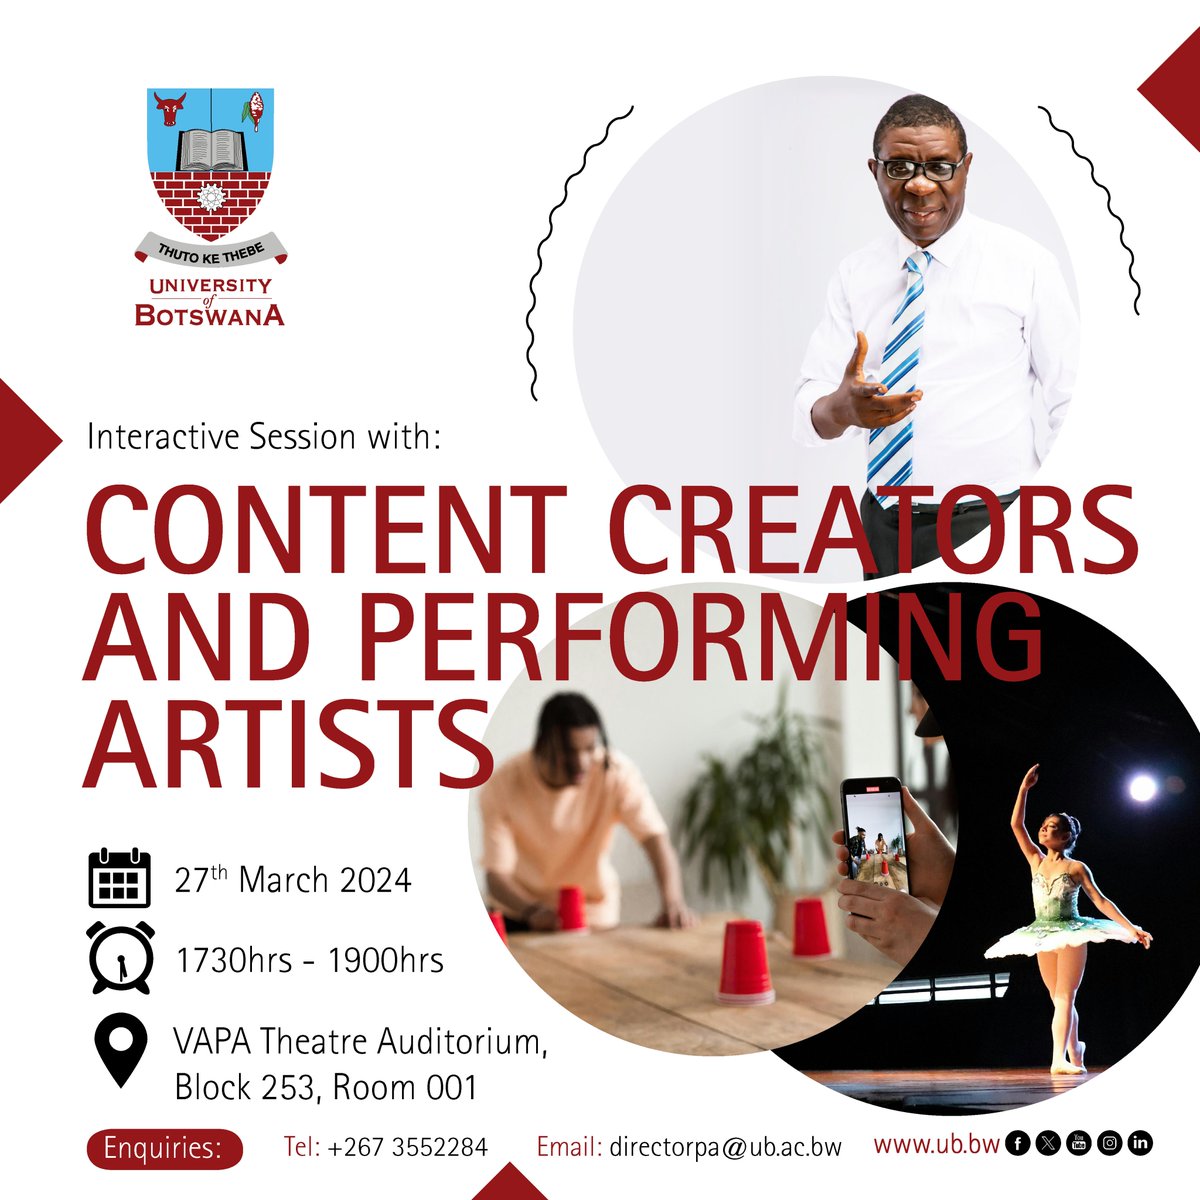 #JoinUs! #March27 Interactive Session with Content Creators and Performing Artists.